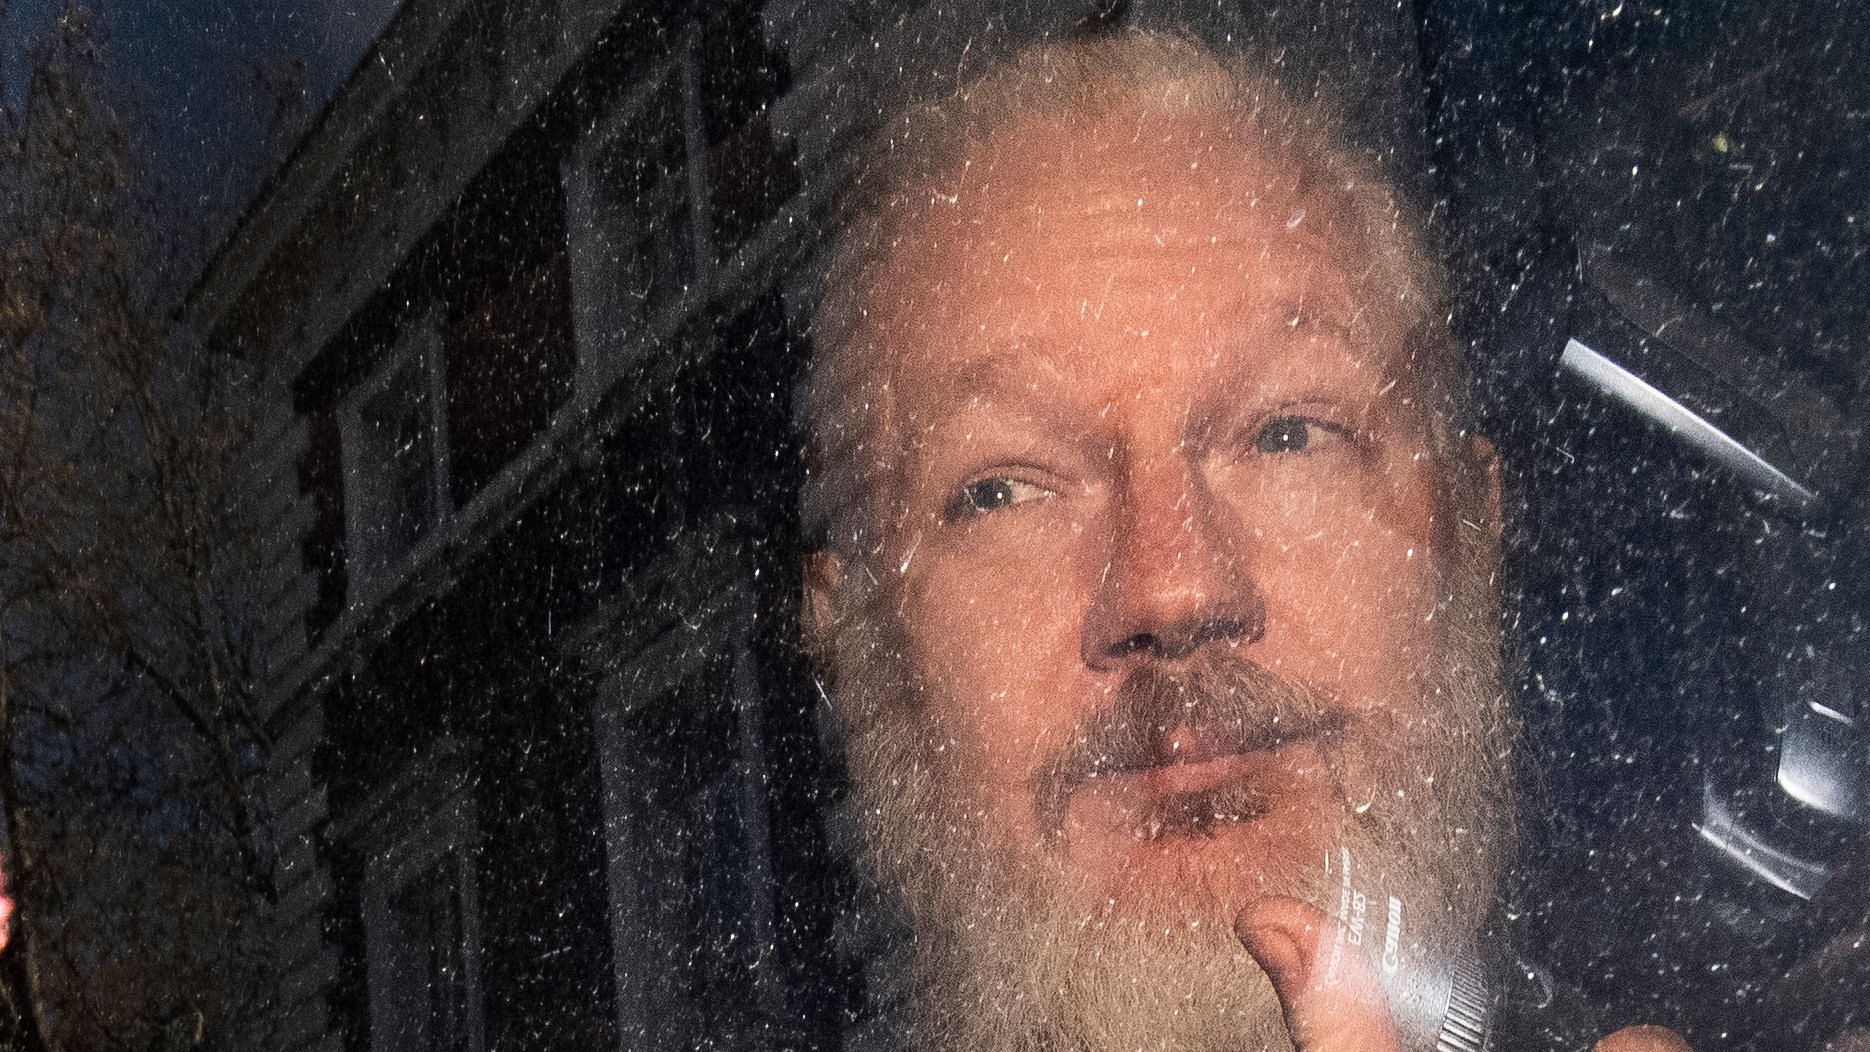 Julian Assange gestures as he arrives at Westminster Magistrates’ Court in London, after the WikiLeaks founder was arrested by officers from the Metropolitan Police and taken into custody Thursday 11 April 2019.&nbsp;